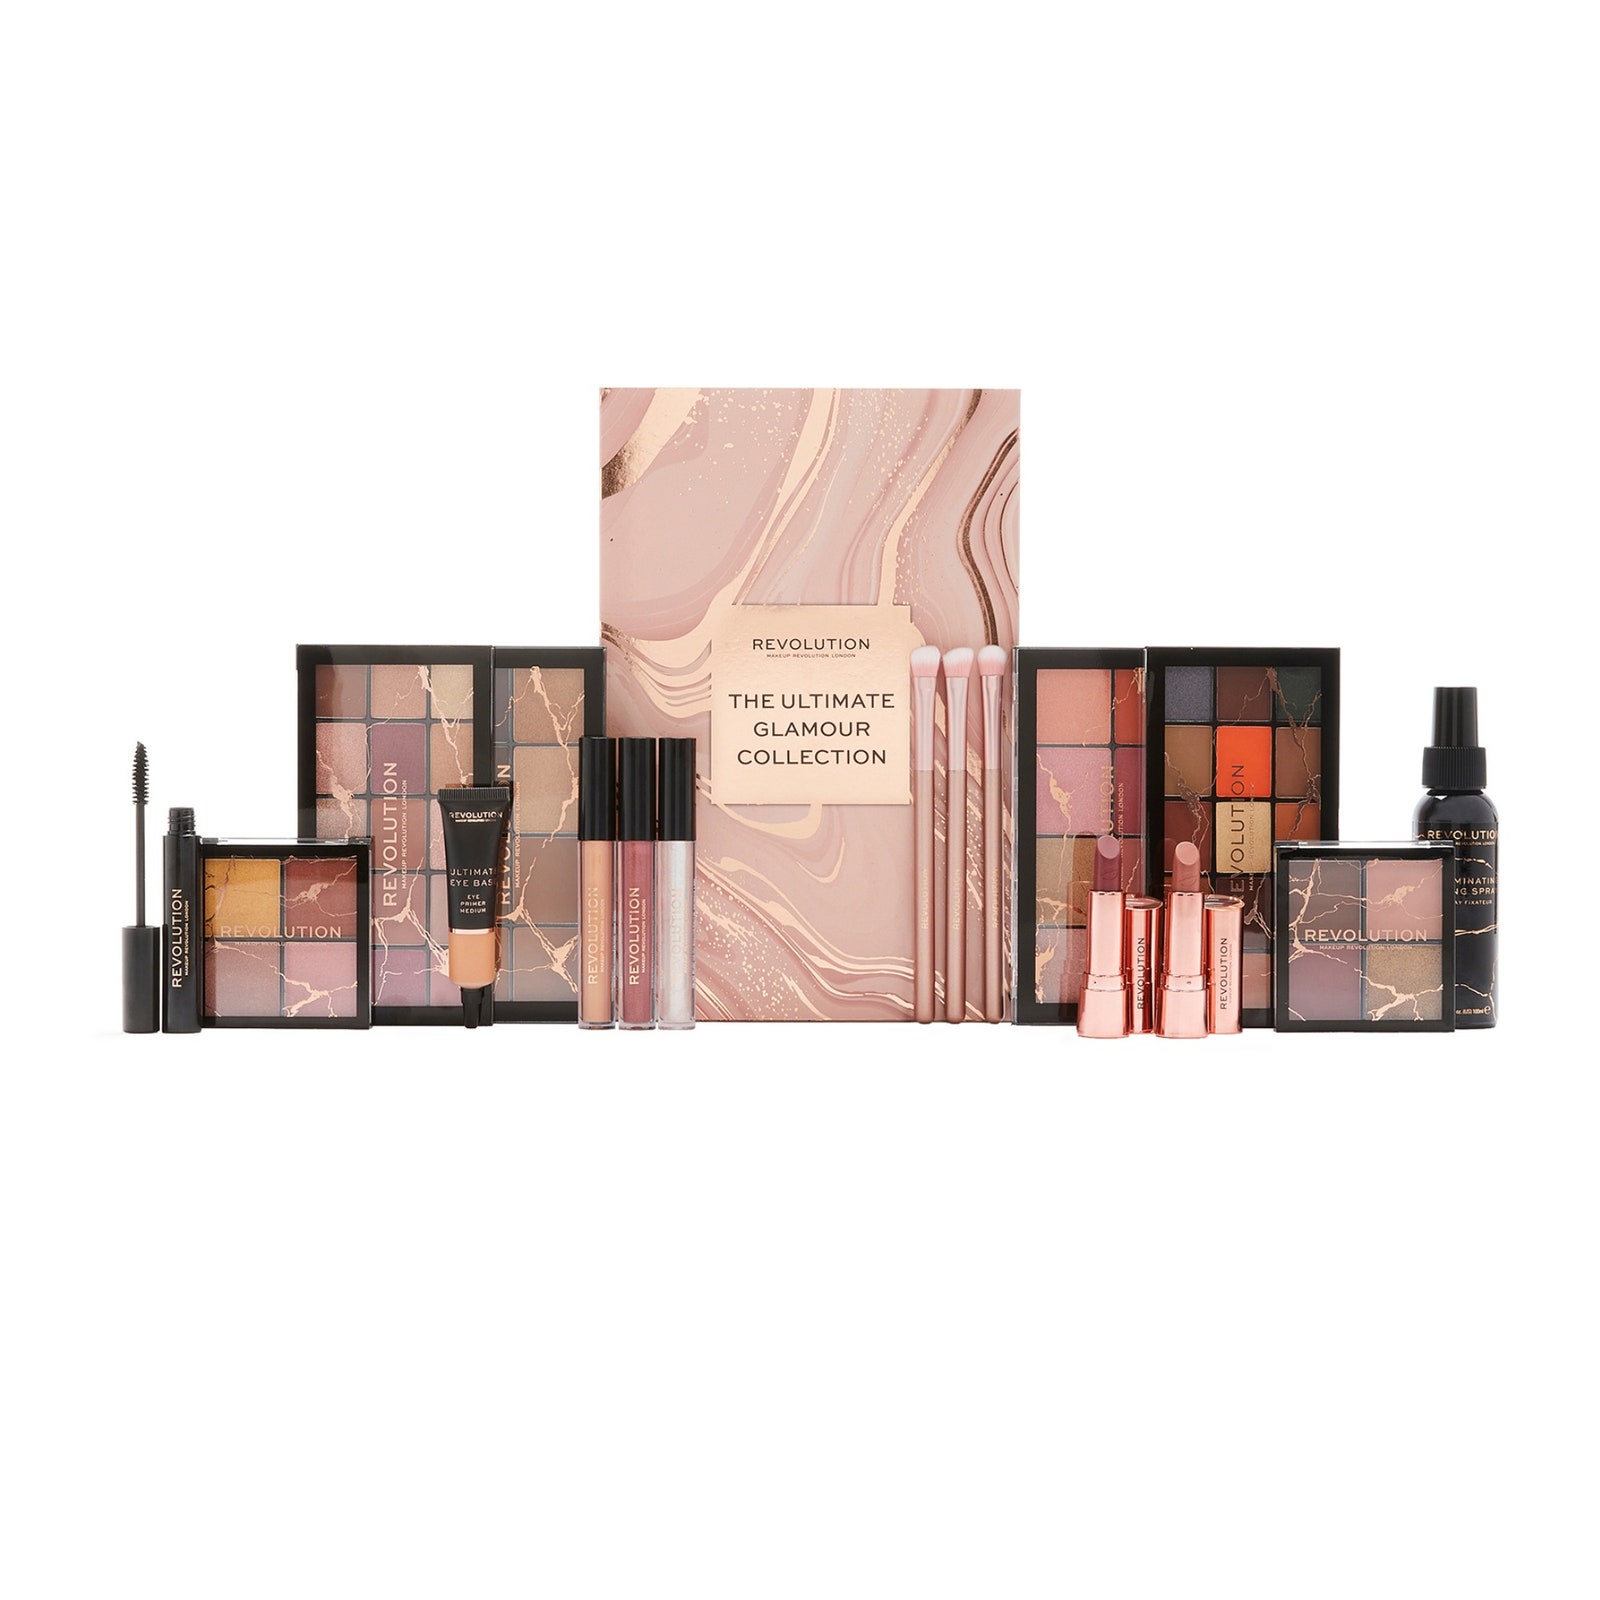 Адвенткалендарь REVOLUTION MAKEUP THE ULTIMATE GLAMOUR COLLECTION SET